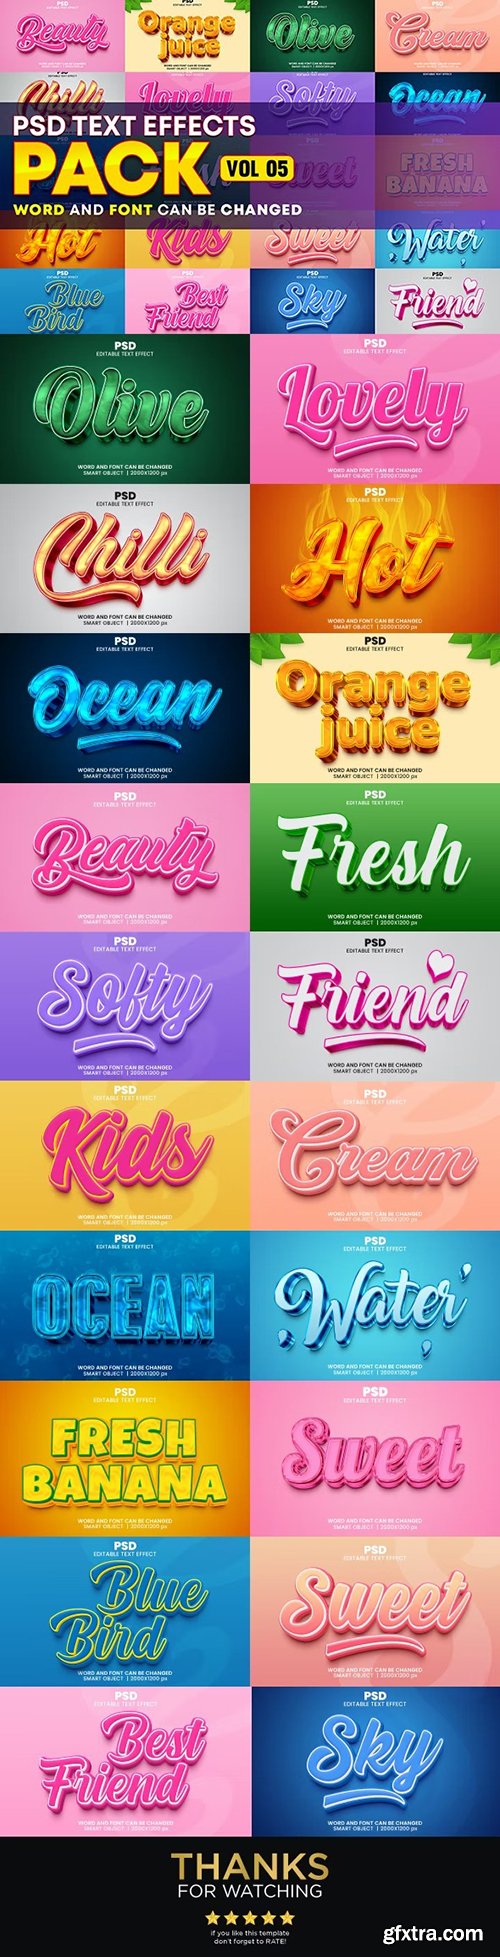 GraphicRiver - Photoshop Editable 3d Text Effect Style Pack 40273305